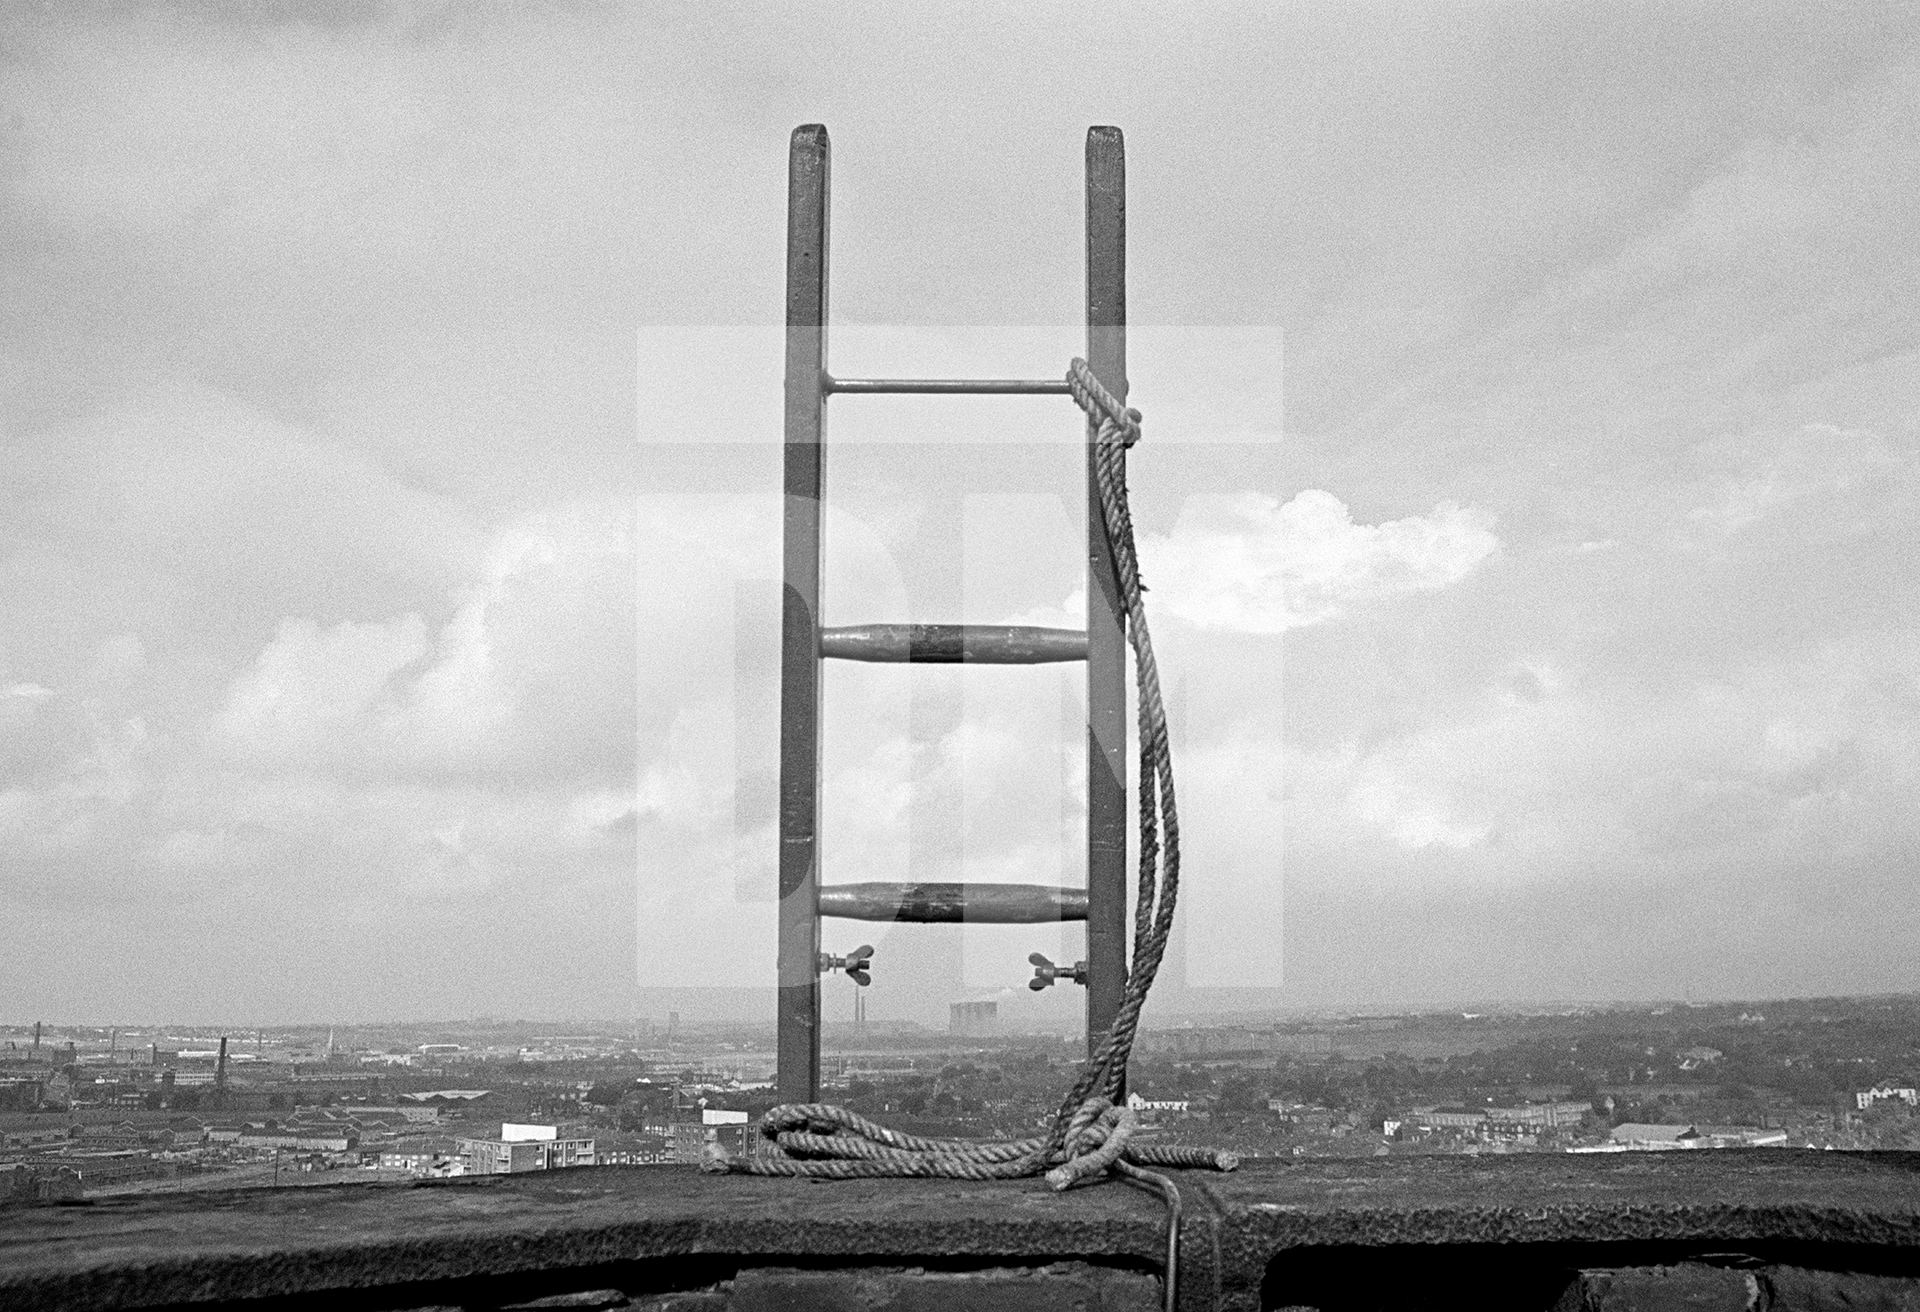 Prior to demolition the laddering is done. Here, 150 feet up, we see the top of the eleventh ladder, complete with lashings. September 1976 by Daniel Meadows